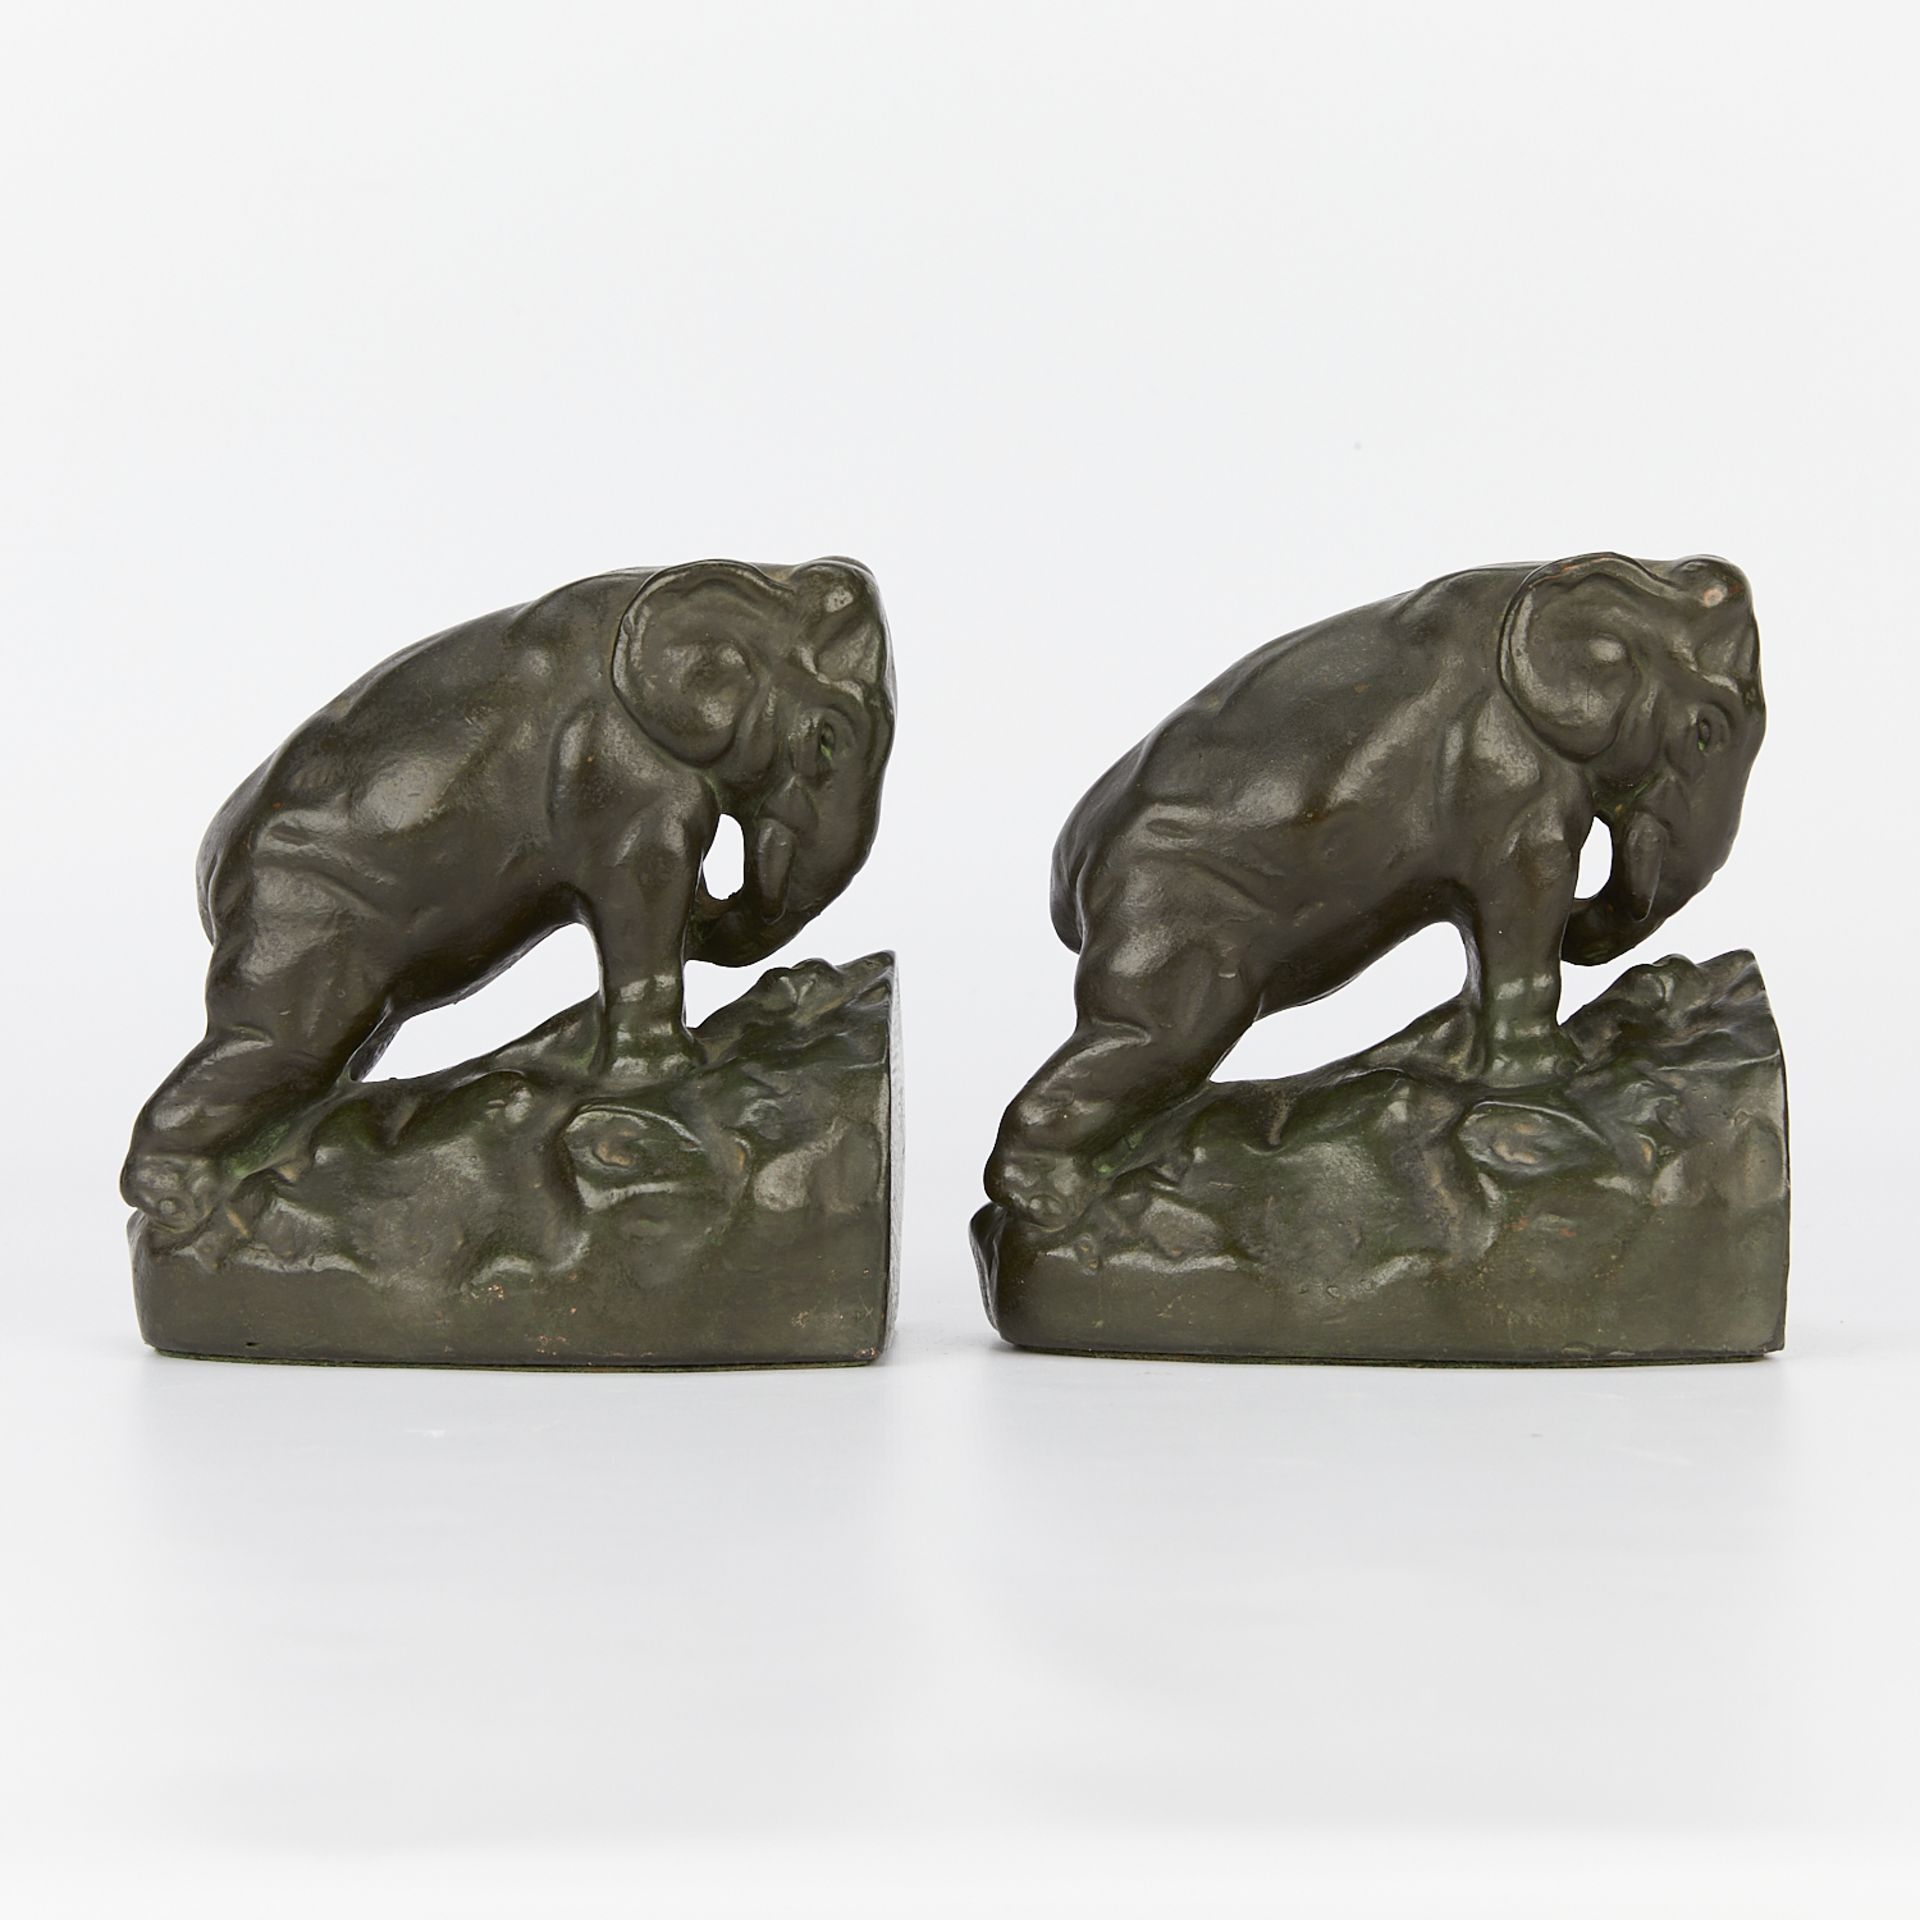 Pair of Bronze or Copper Elephant Bookends - Image 6 of 11